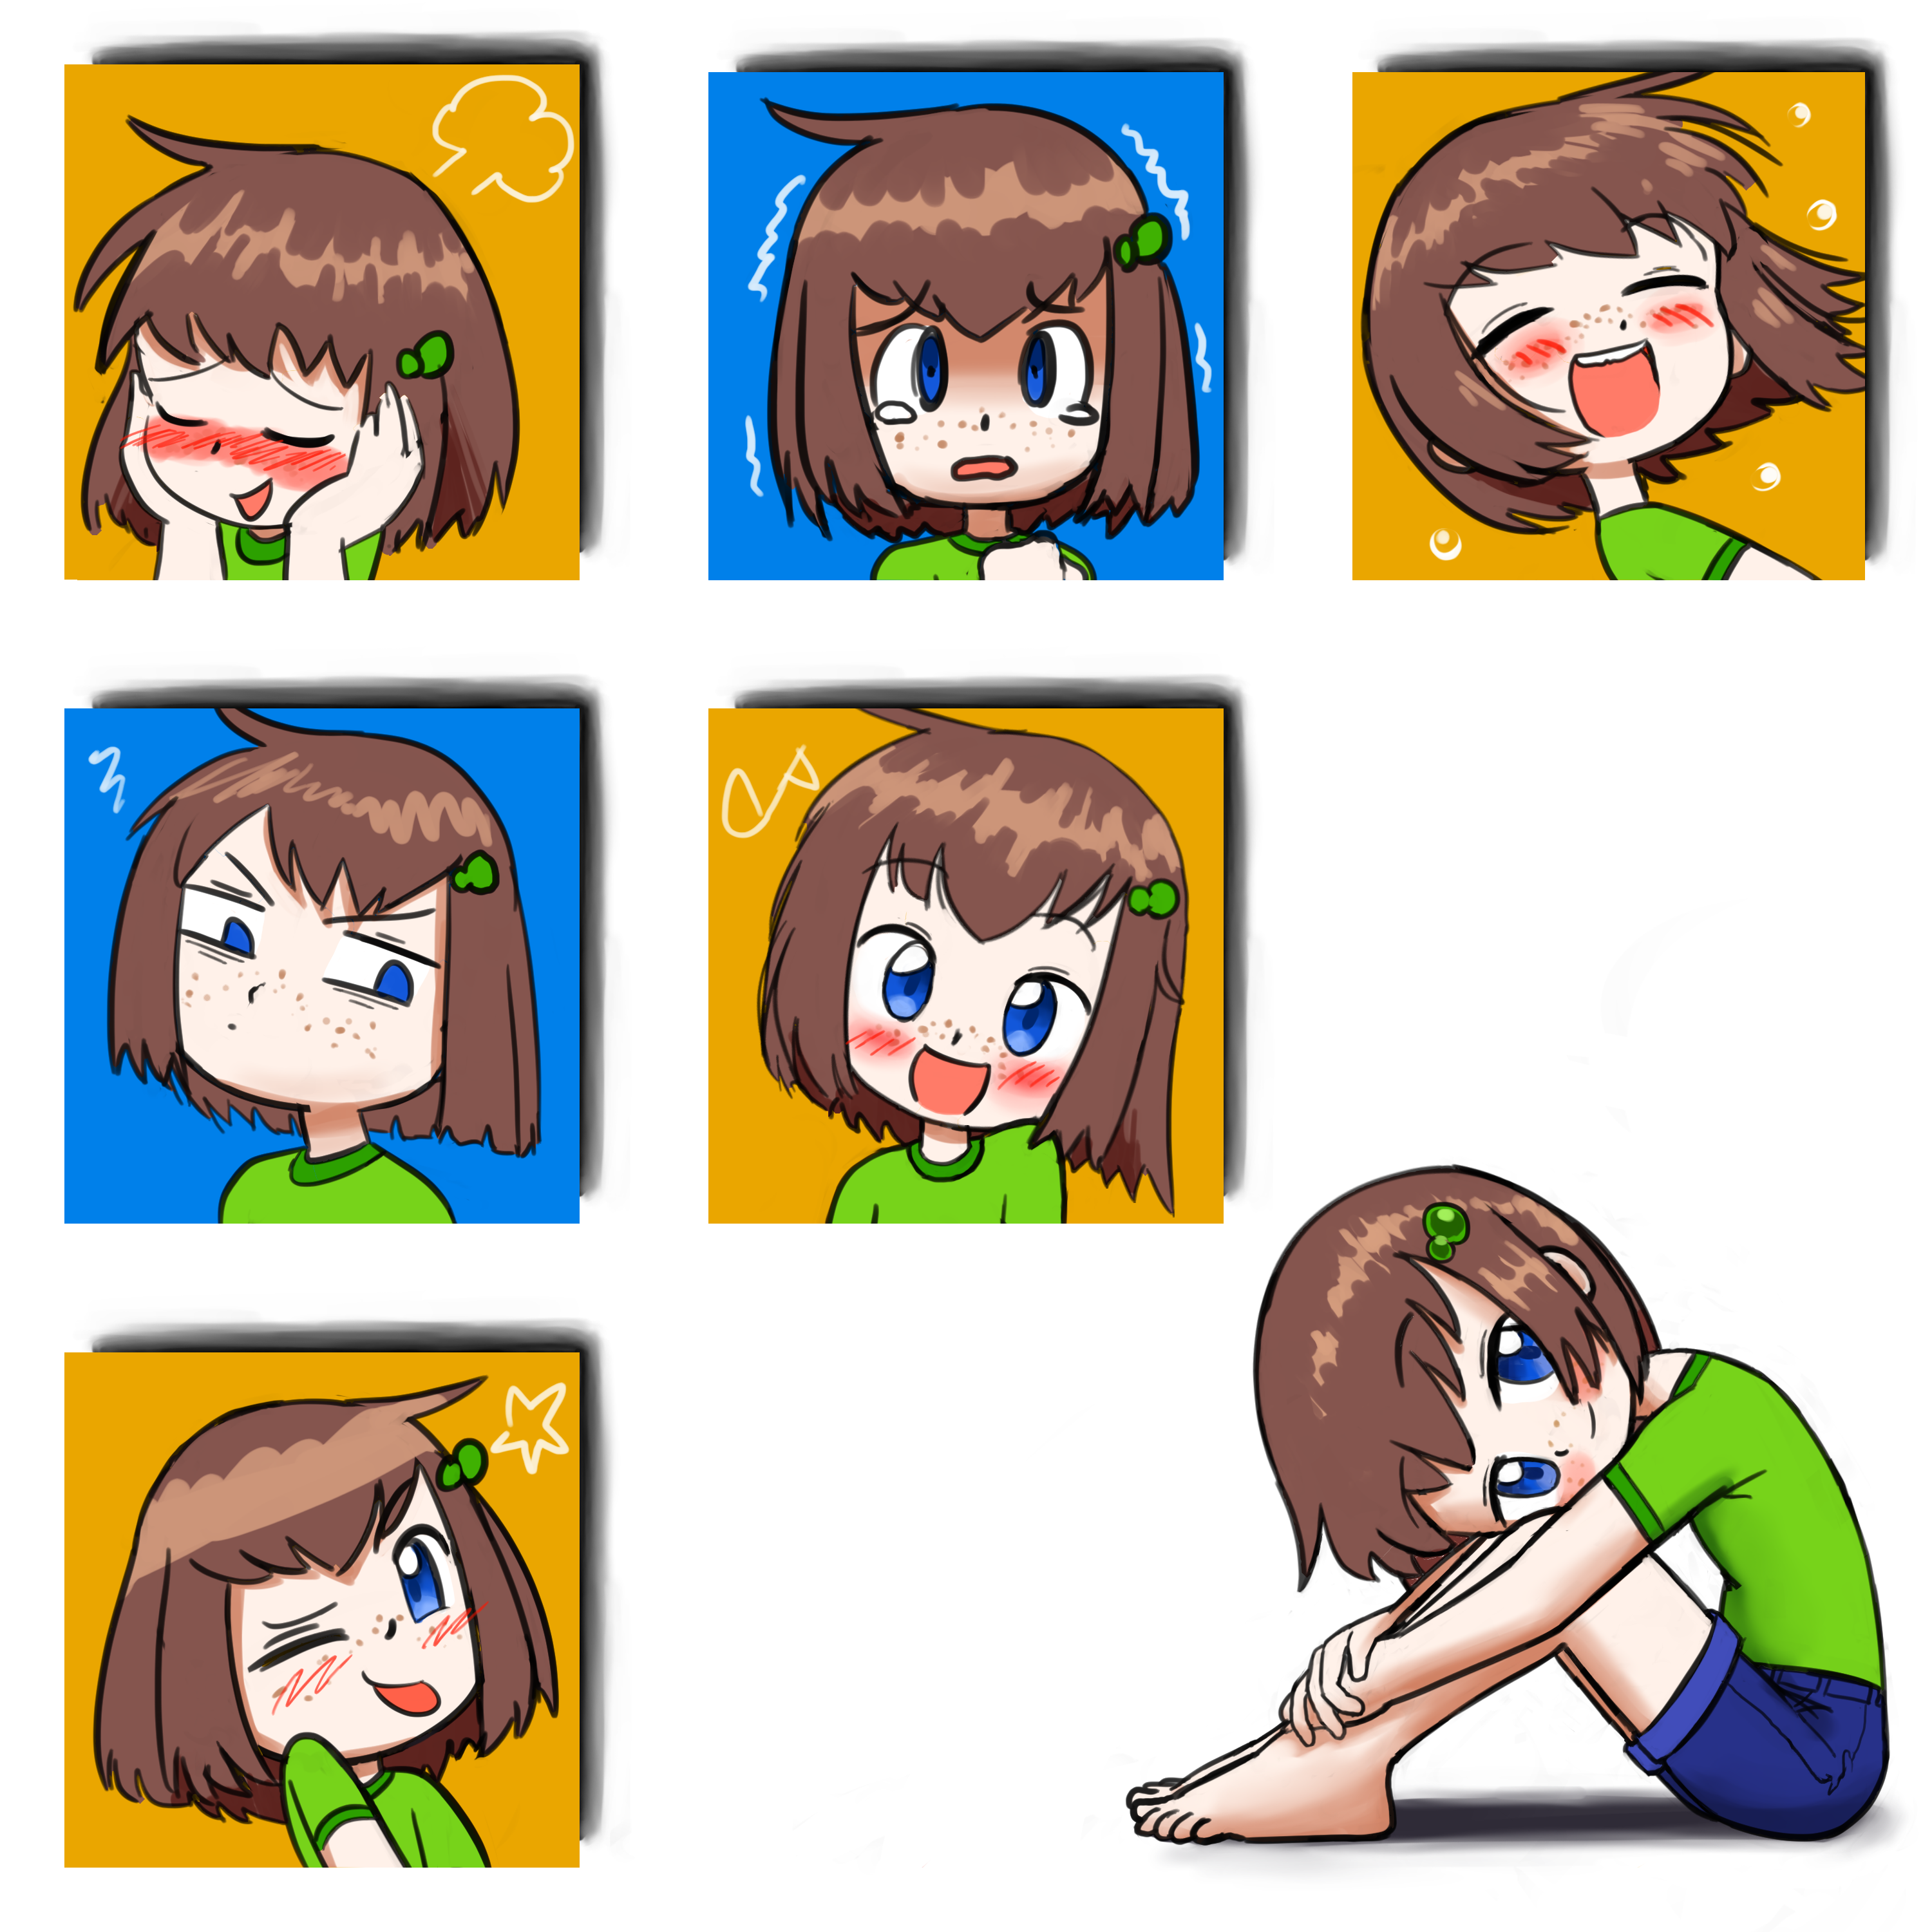 Lily faces